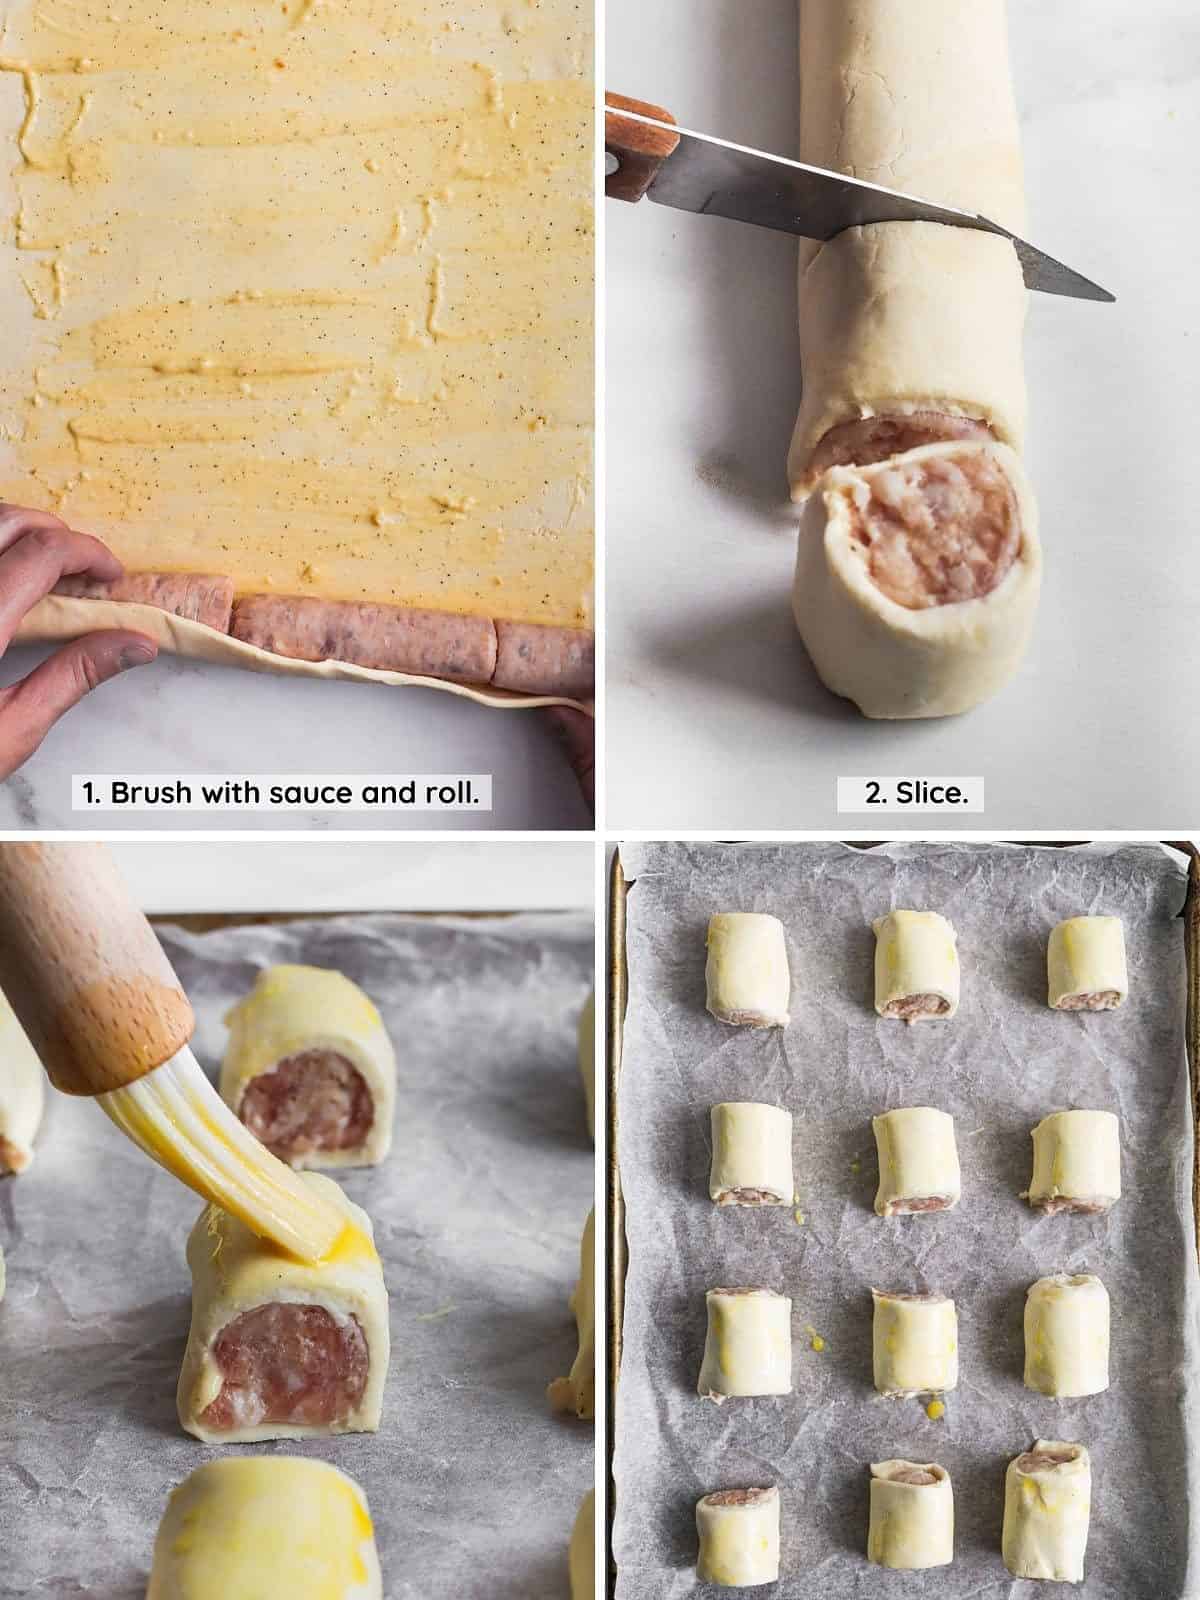 Showing how to roll and cut puff pastry to make pigs in a blanket.